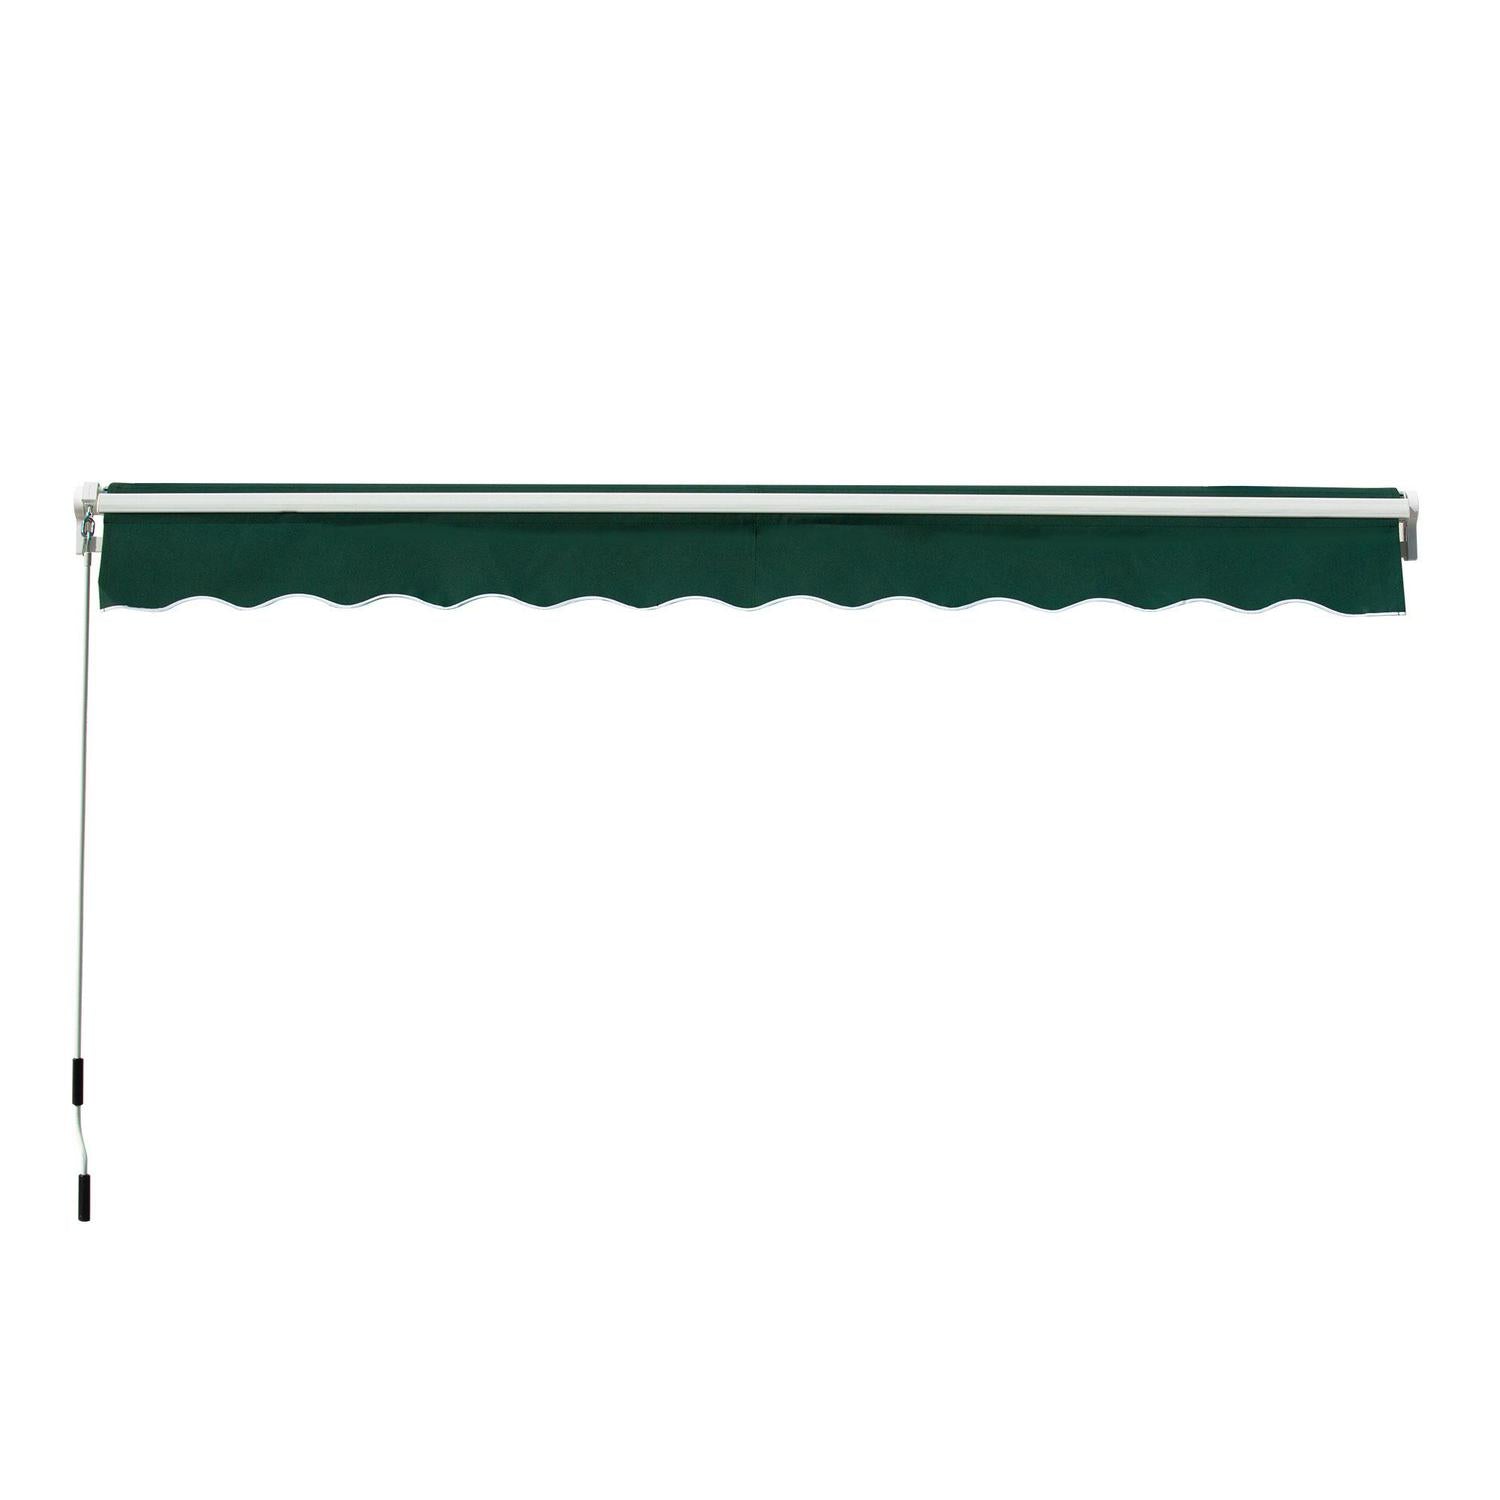 Awning Canopy Manual Retractable Porch Shade Shelter 3 X 2m Green